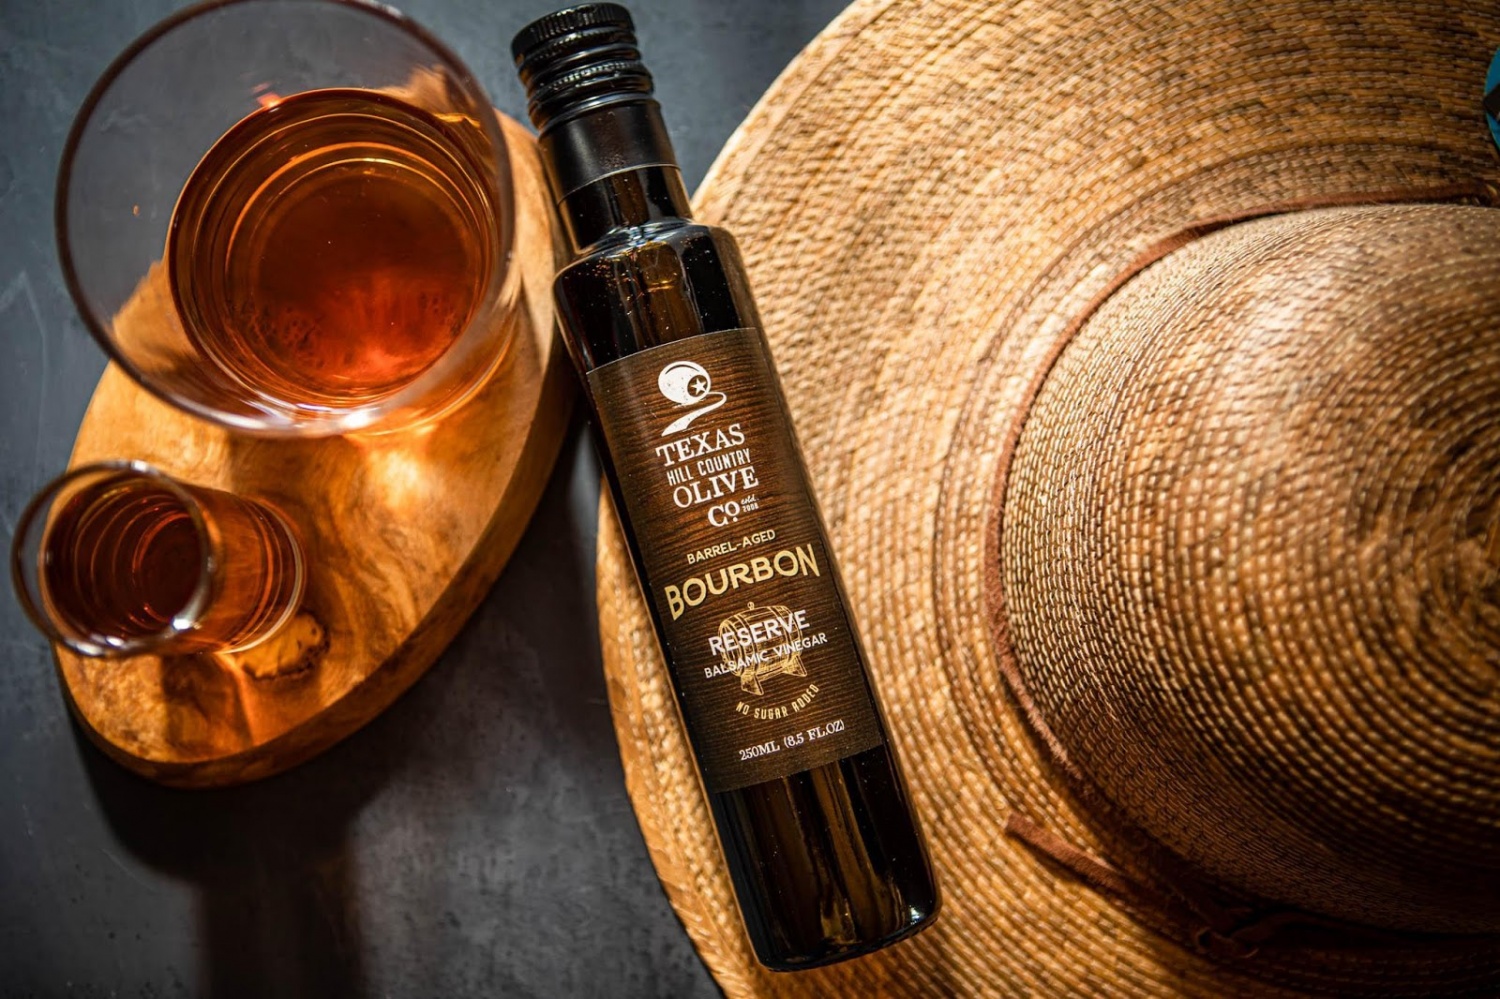 New Texas Olive Oil and Balsamic Vinegars from The Texas Hill Country